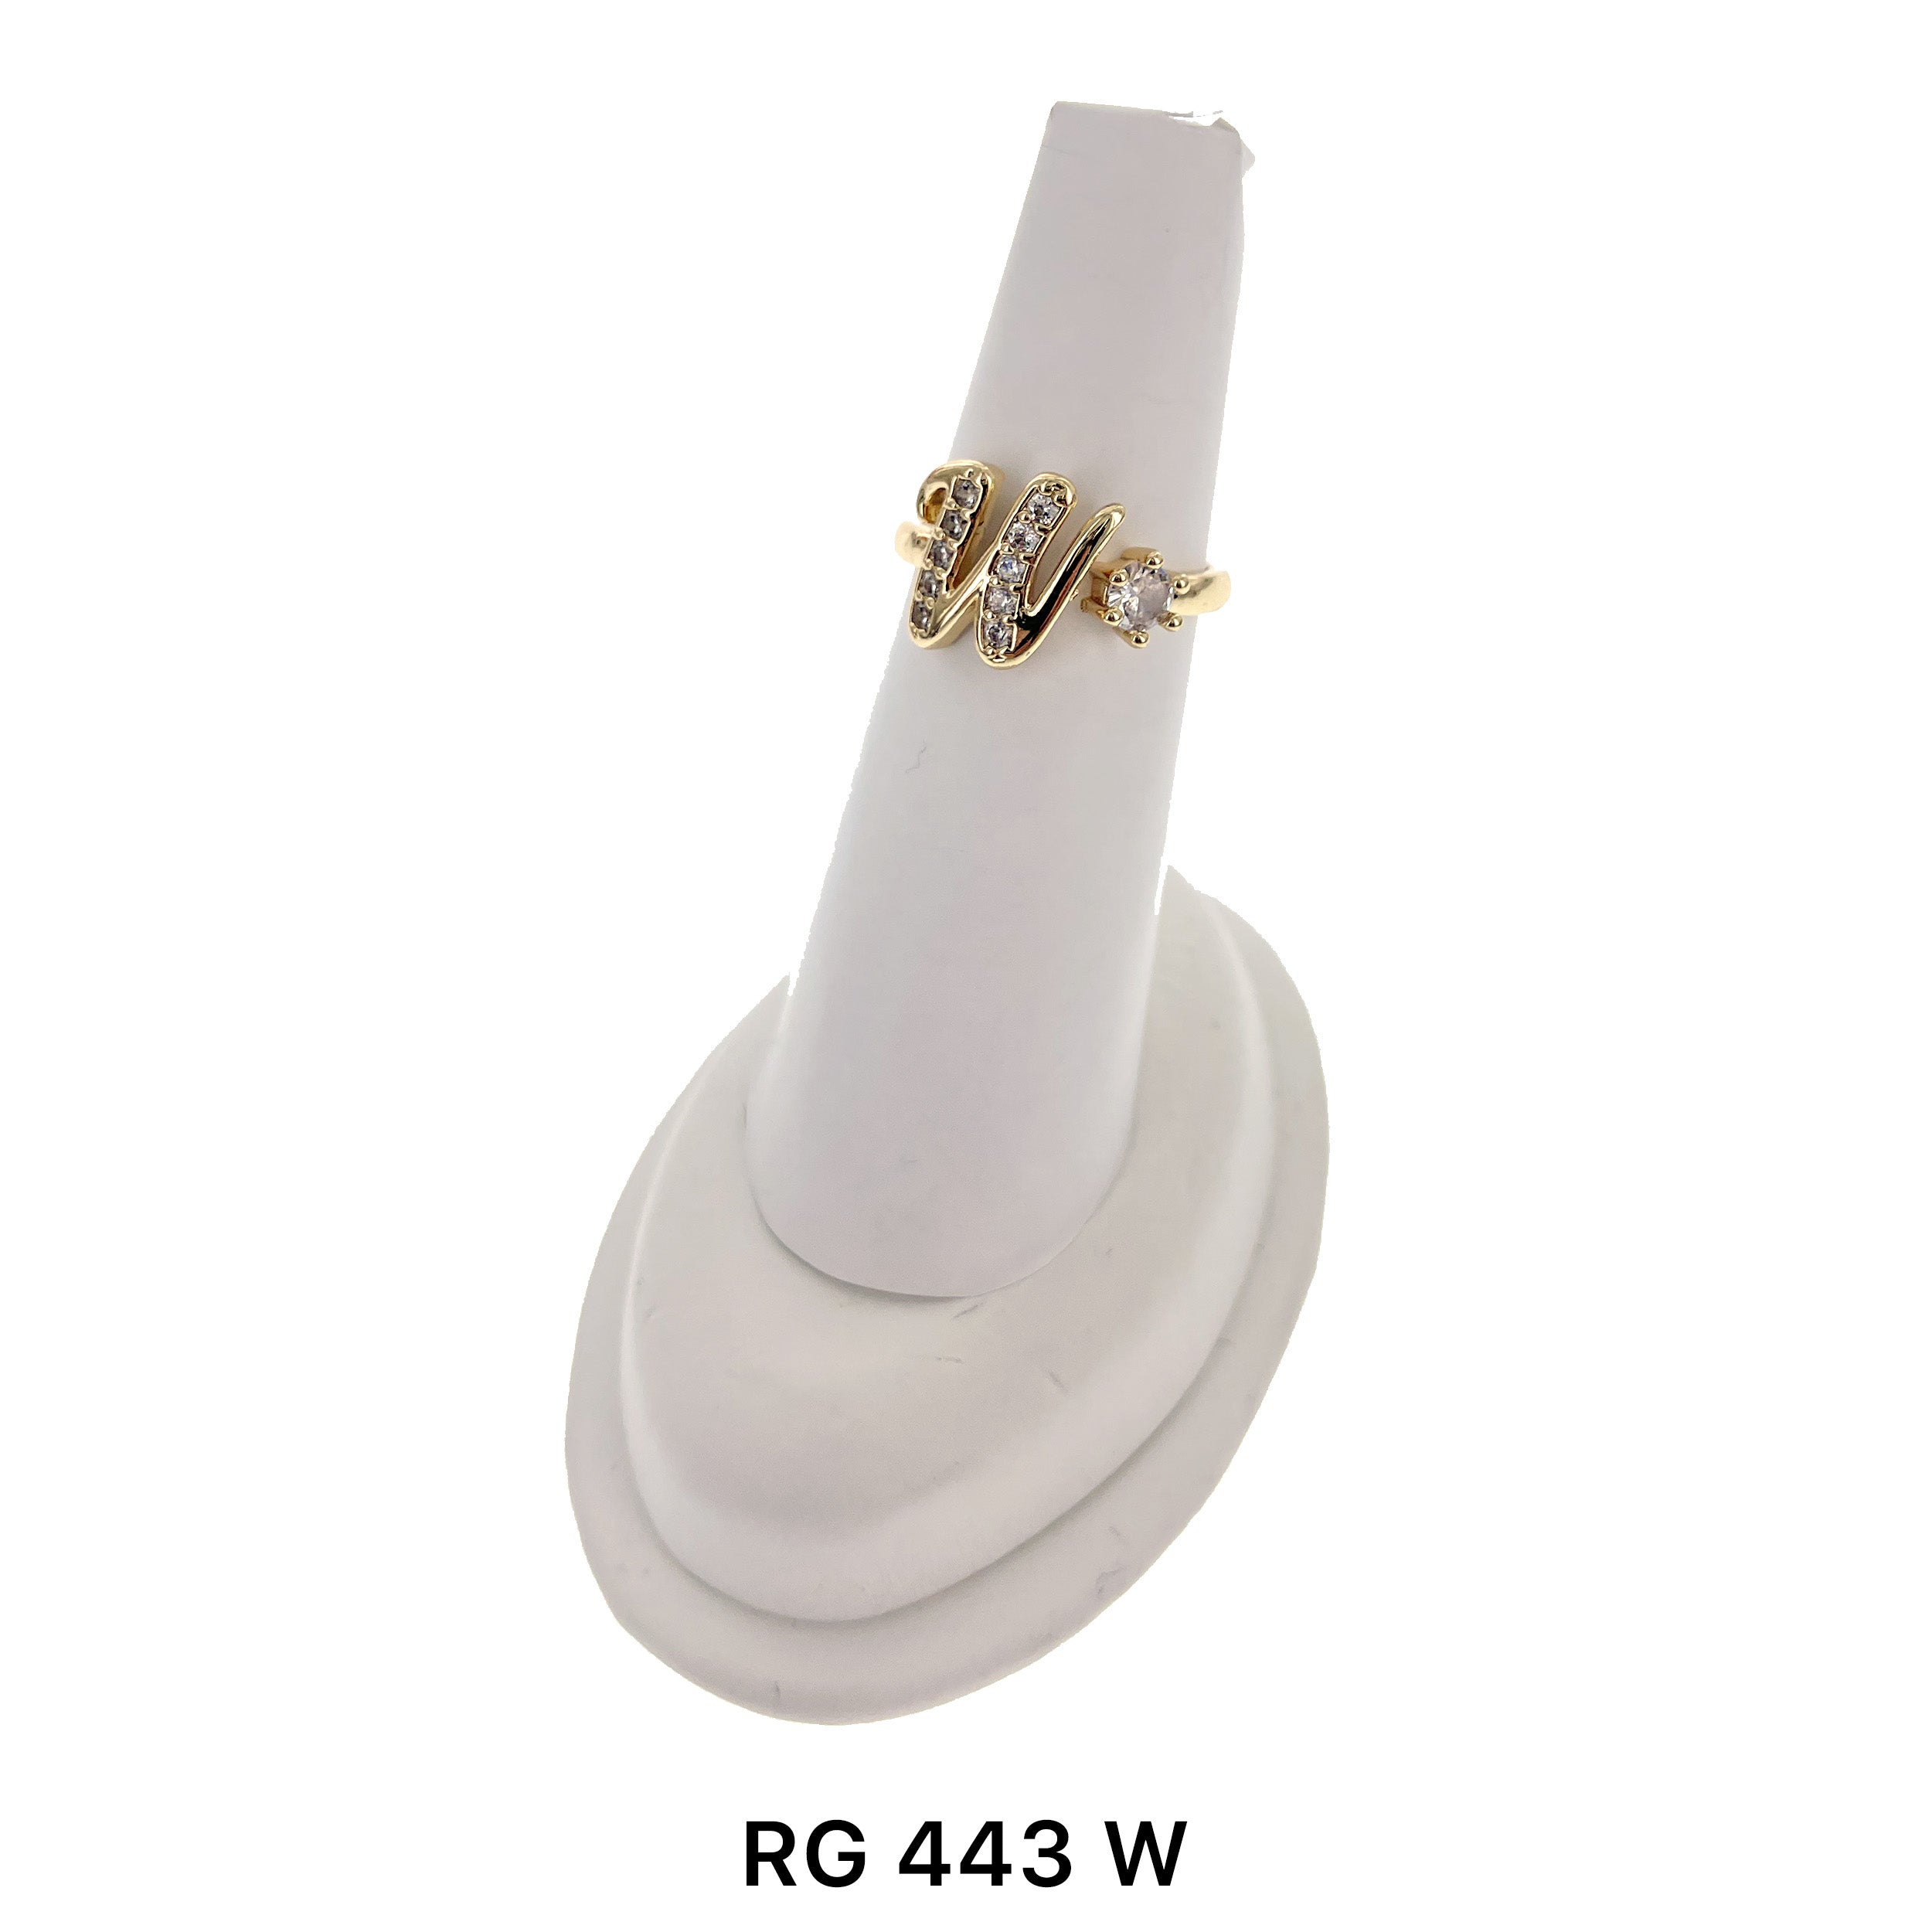 Initial Adjustable Ring RG 443 W